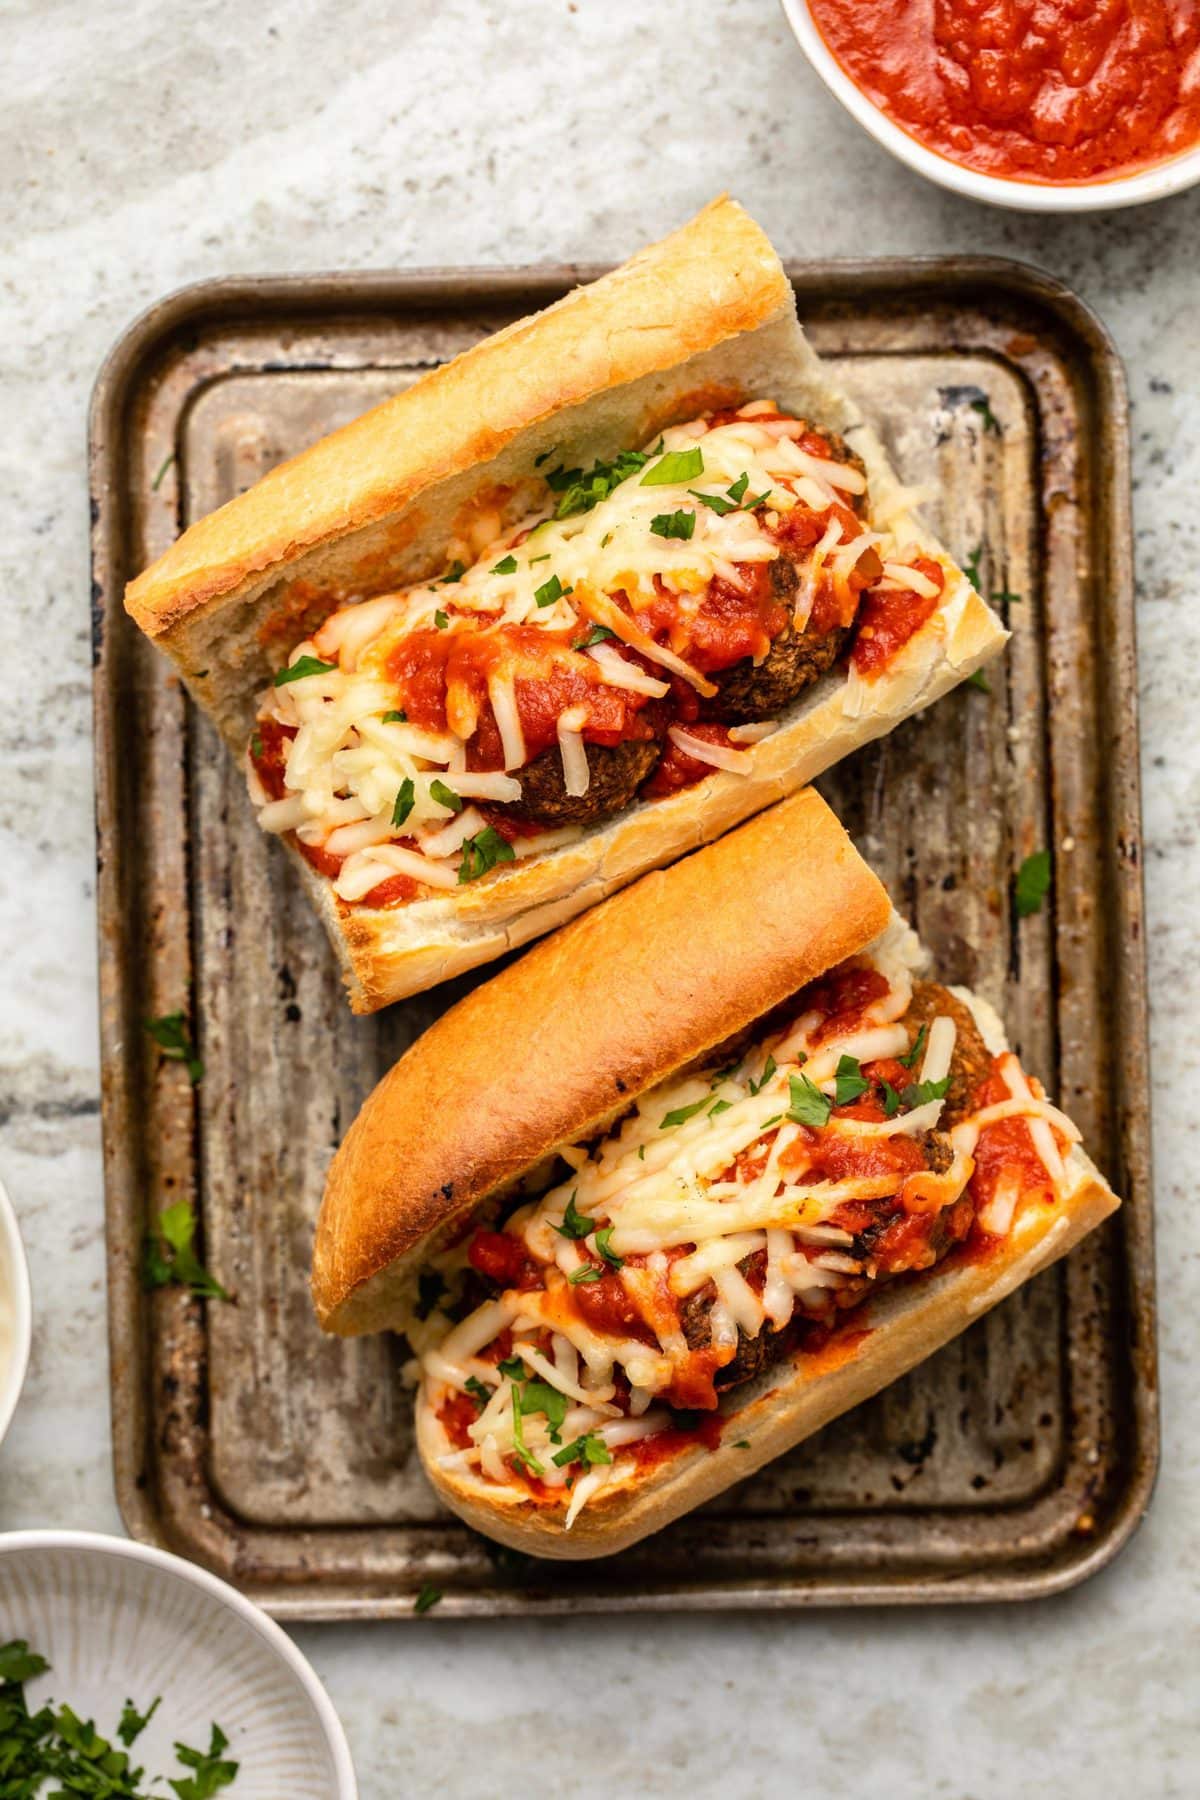 Meatball sub with french bread, meatballs, sauce, cheese, and parsley on small baking tray